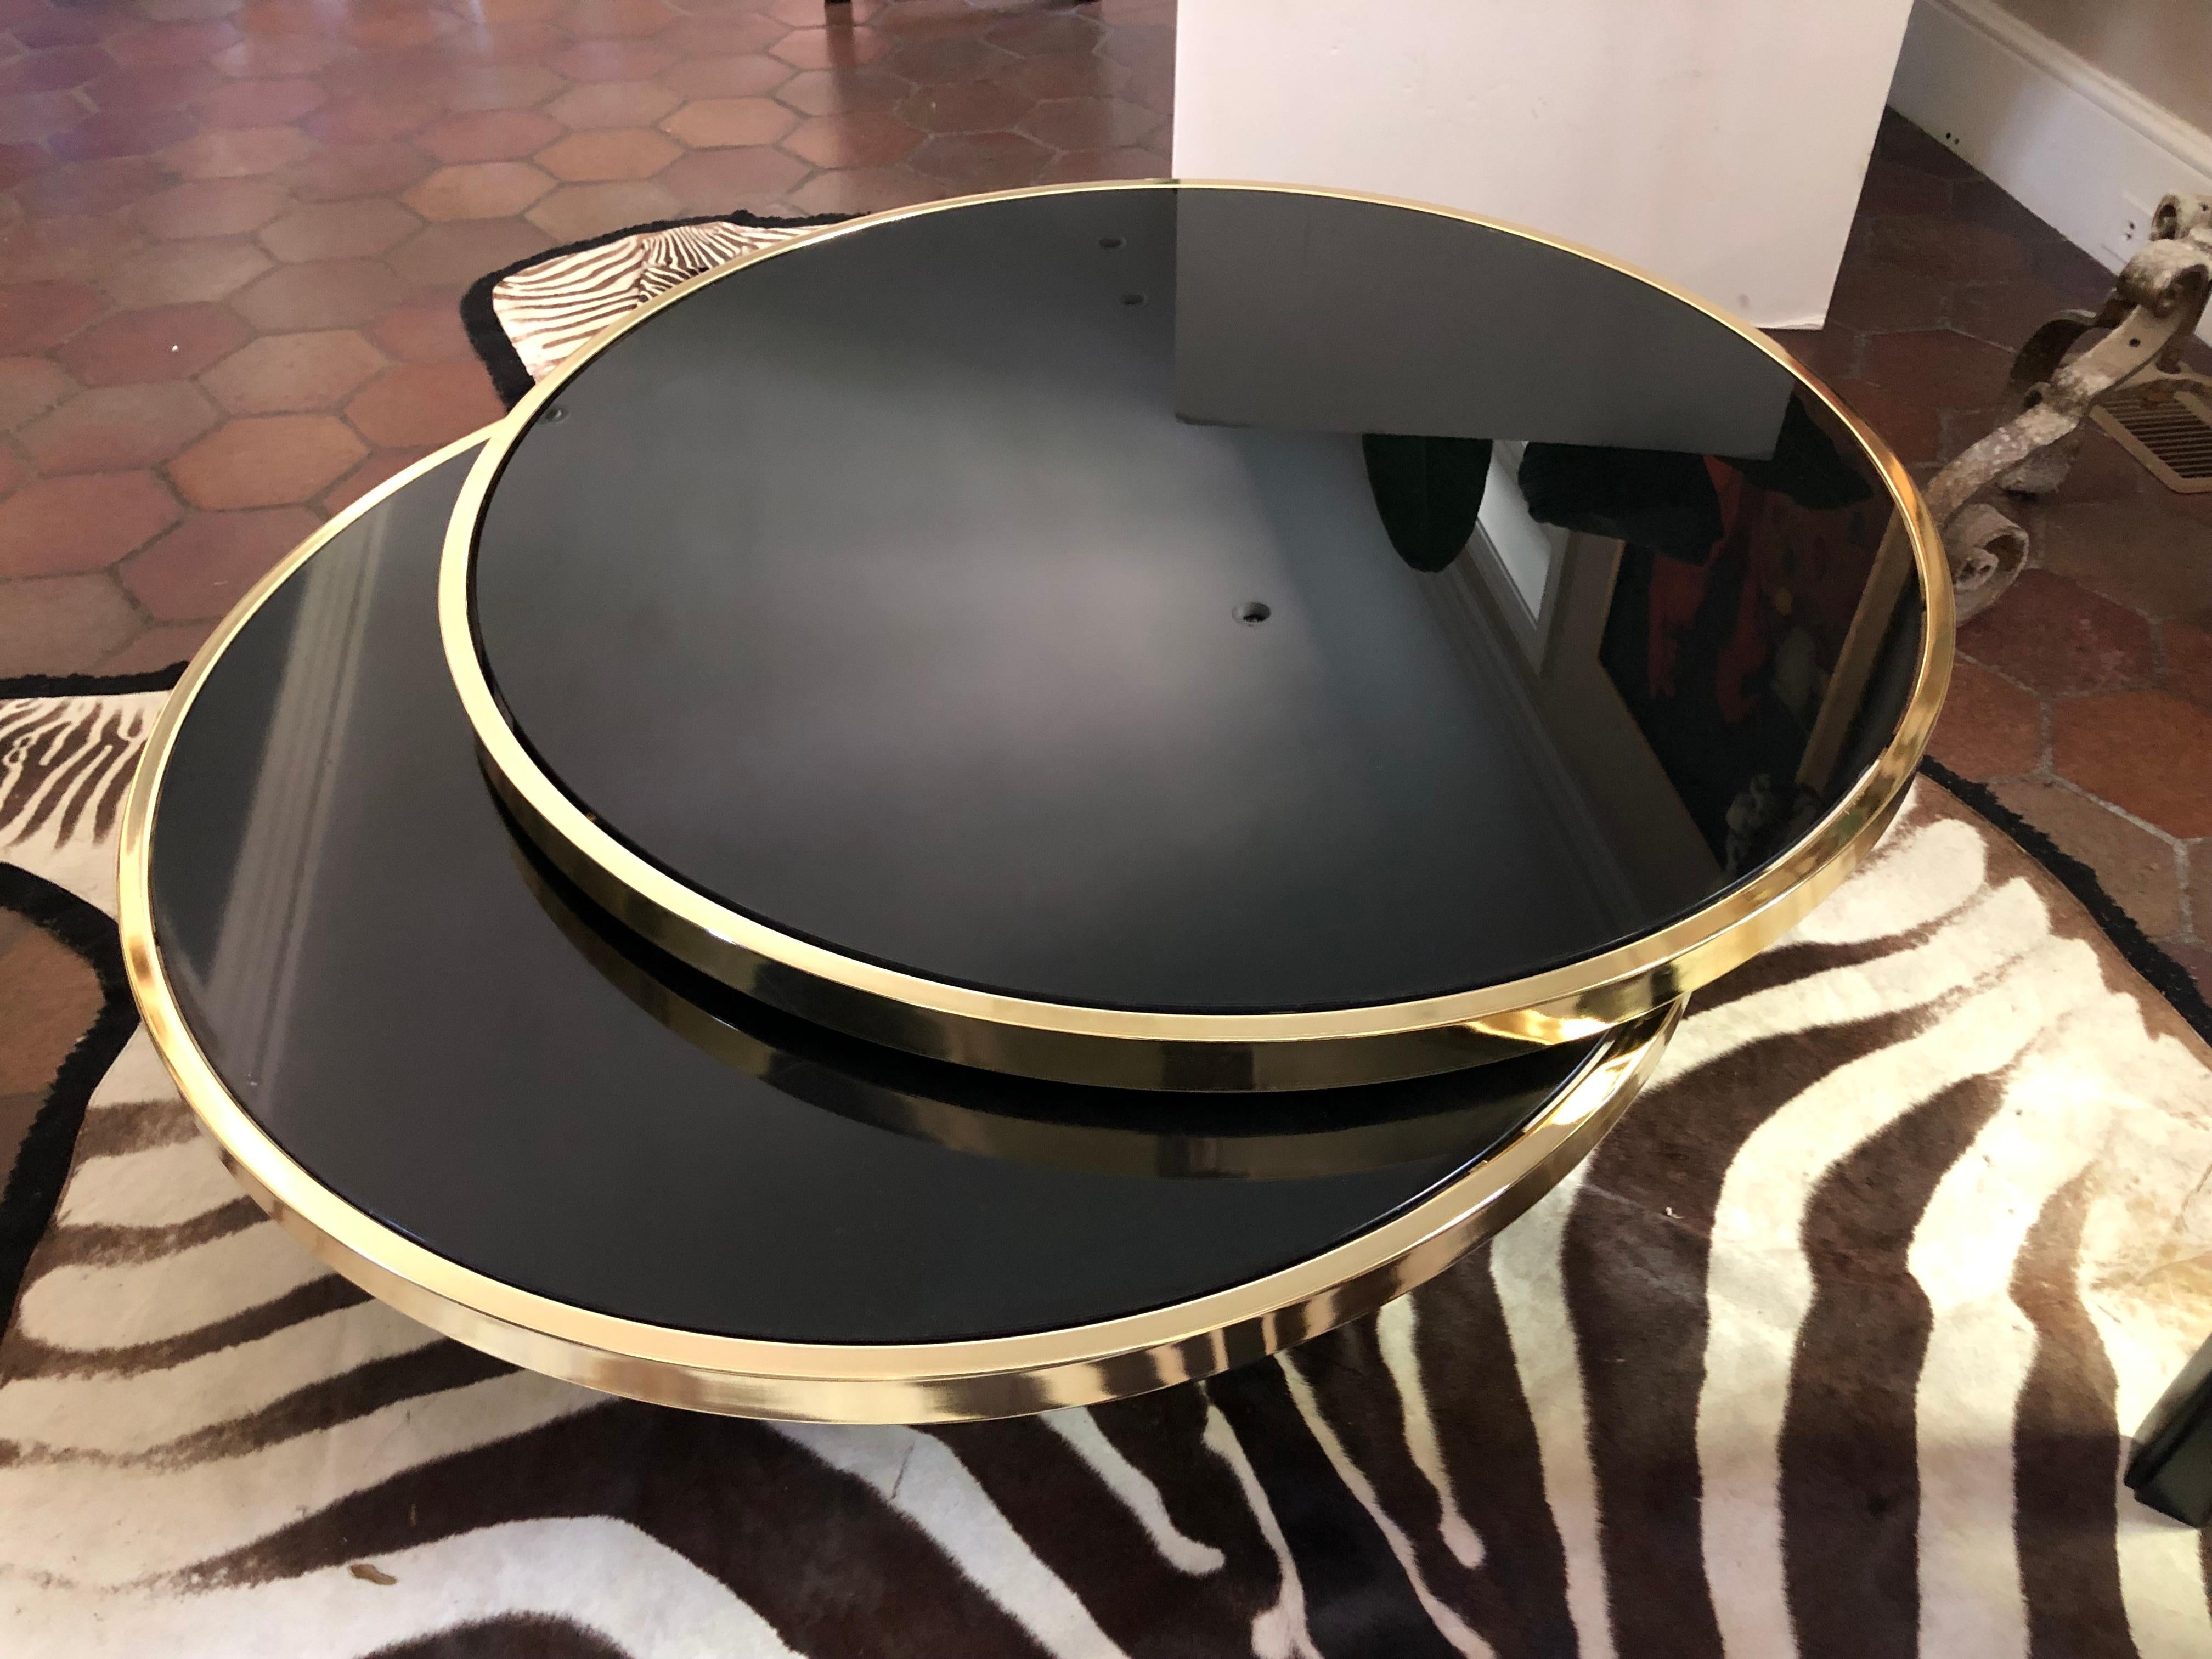 A super sexy round swivel coffee table by Design Institute of America having 2 polished brass and black glass circular surfaces on black base and flawless swivel mechanism. When fully extended the table is 5 ft wide.